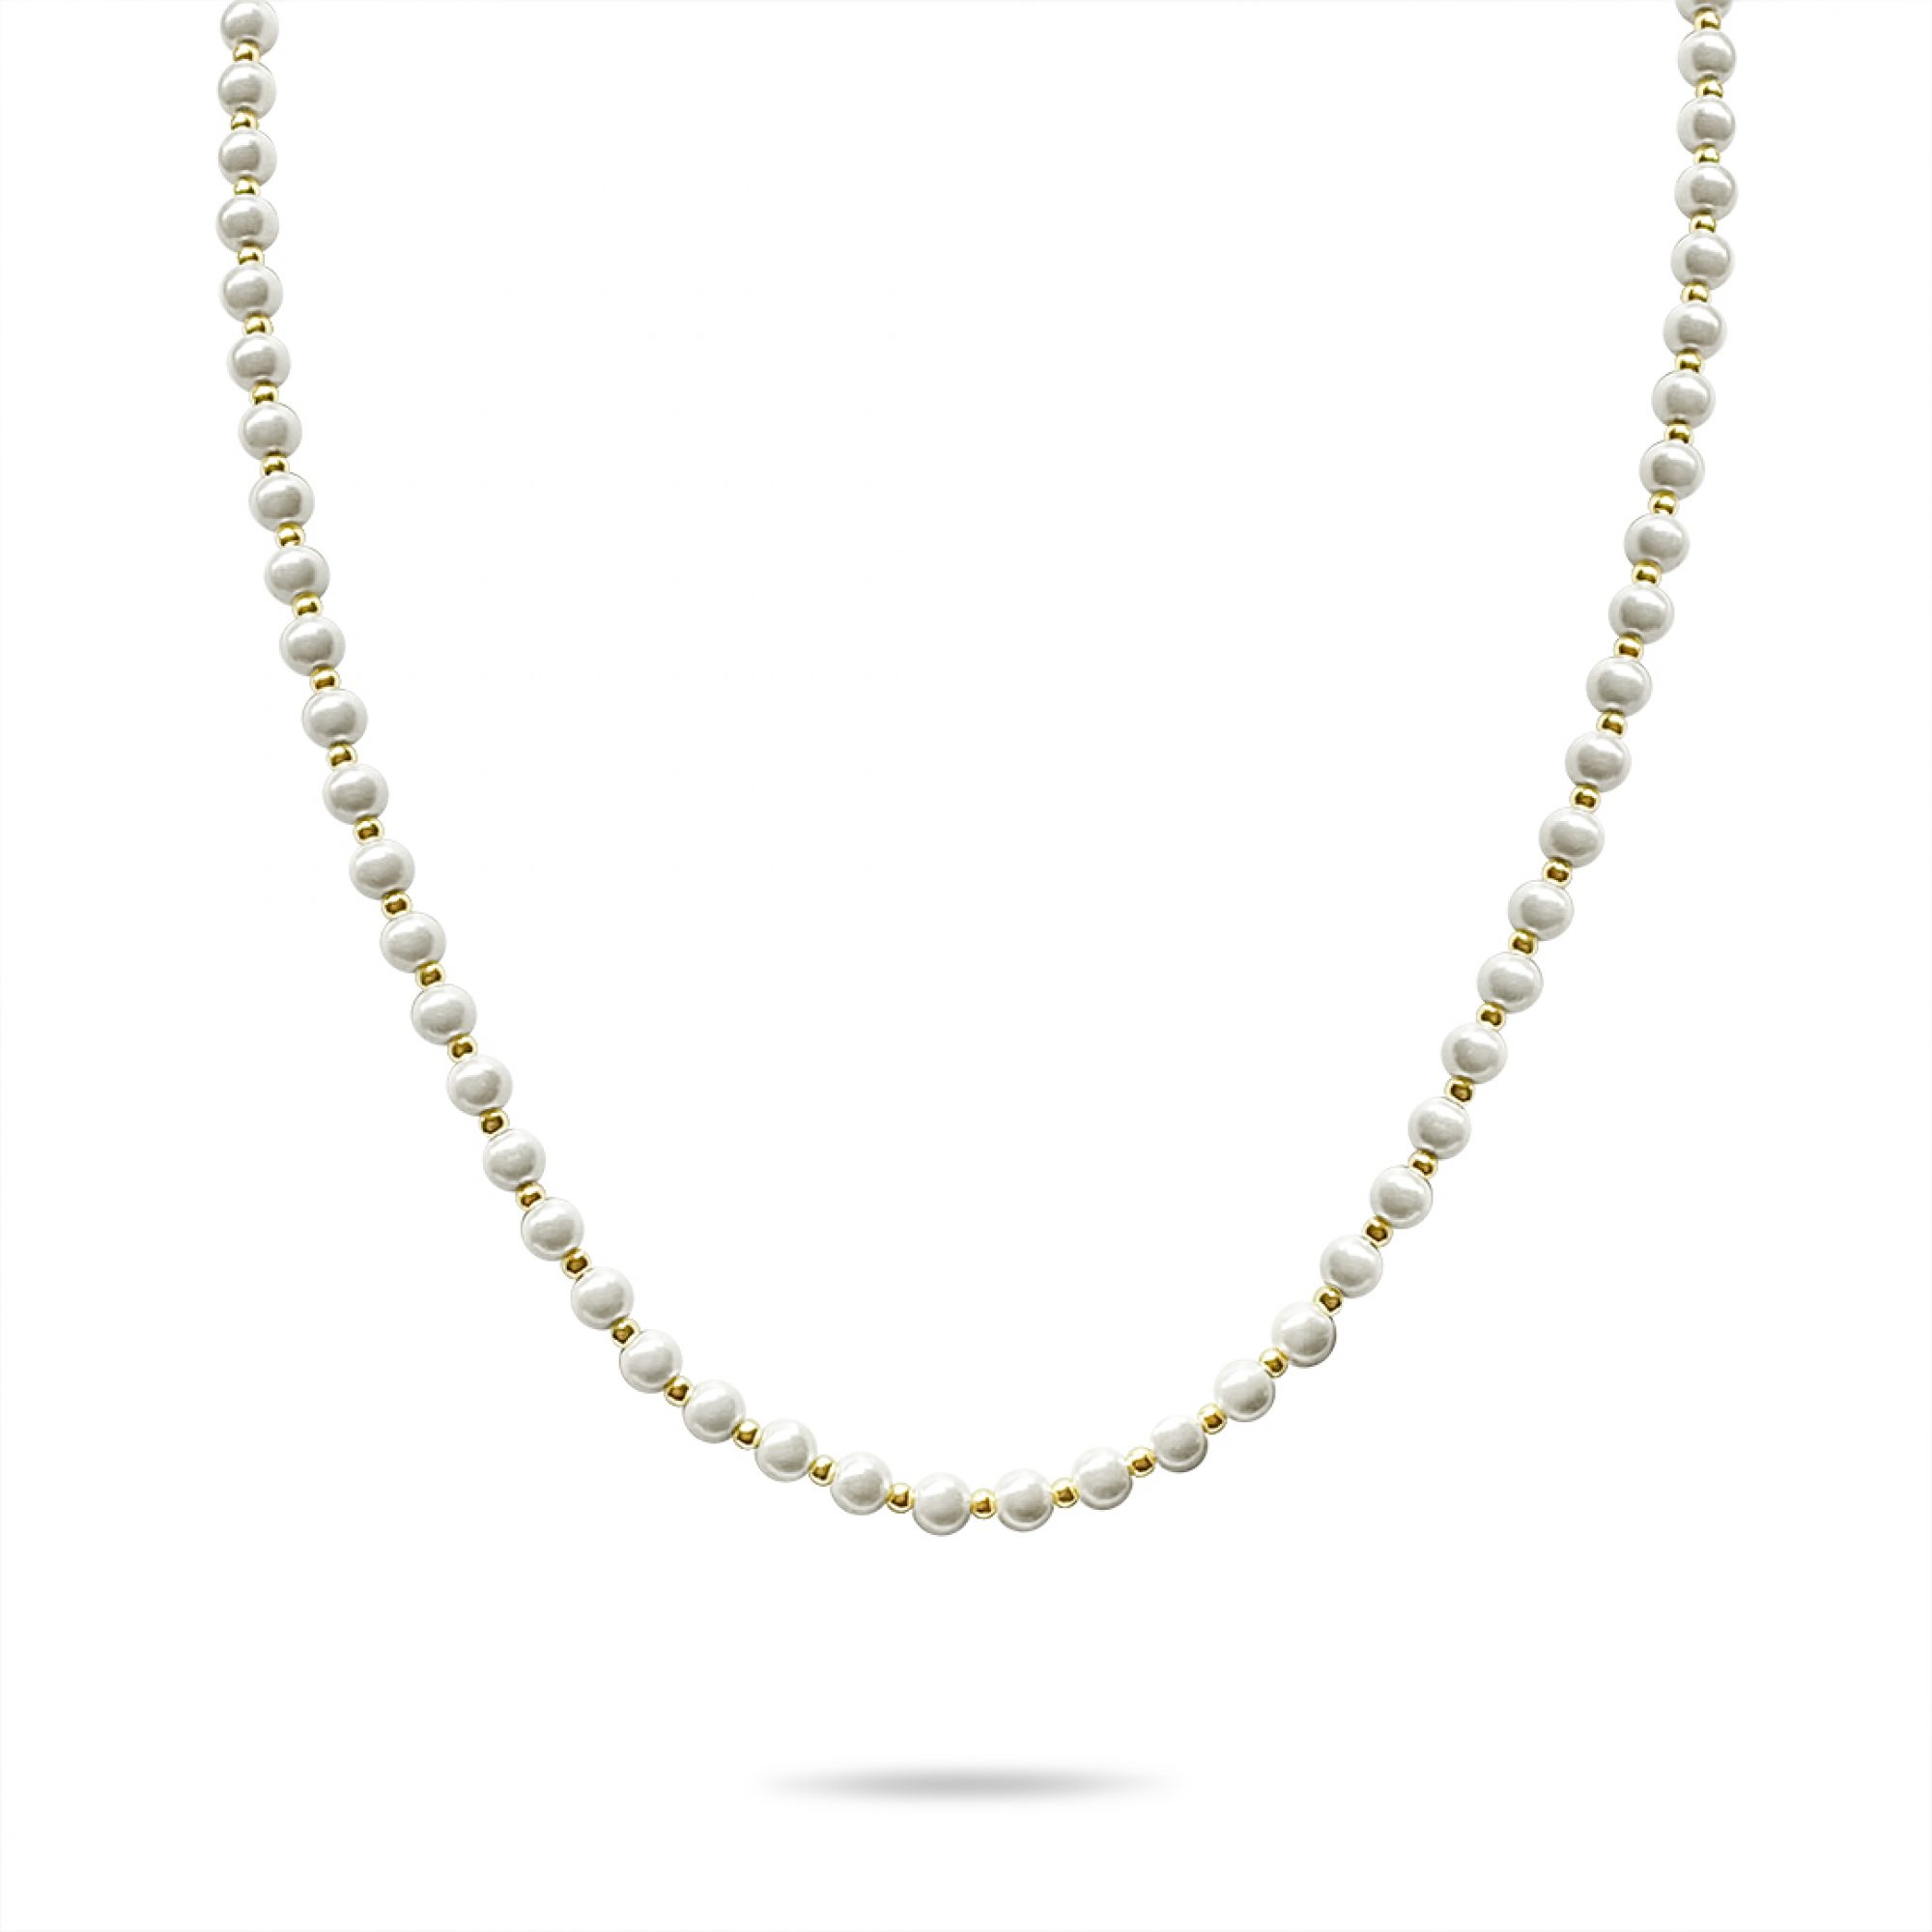 Gold plated necklace with pearls